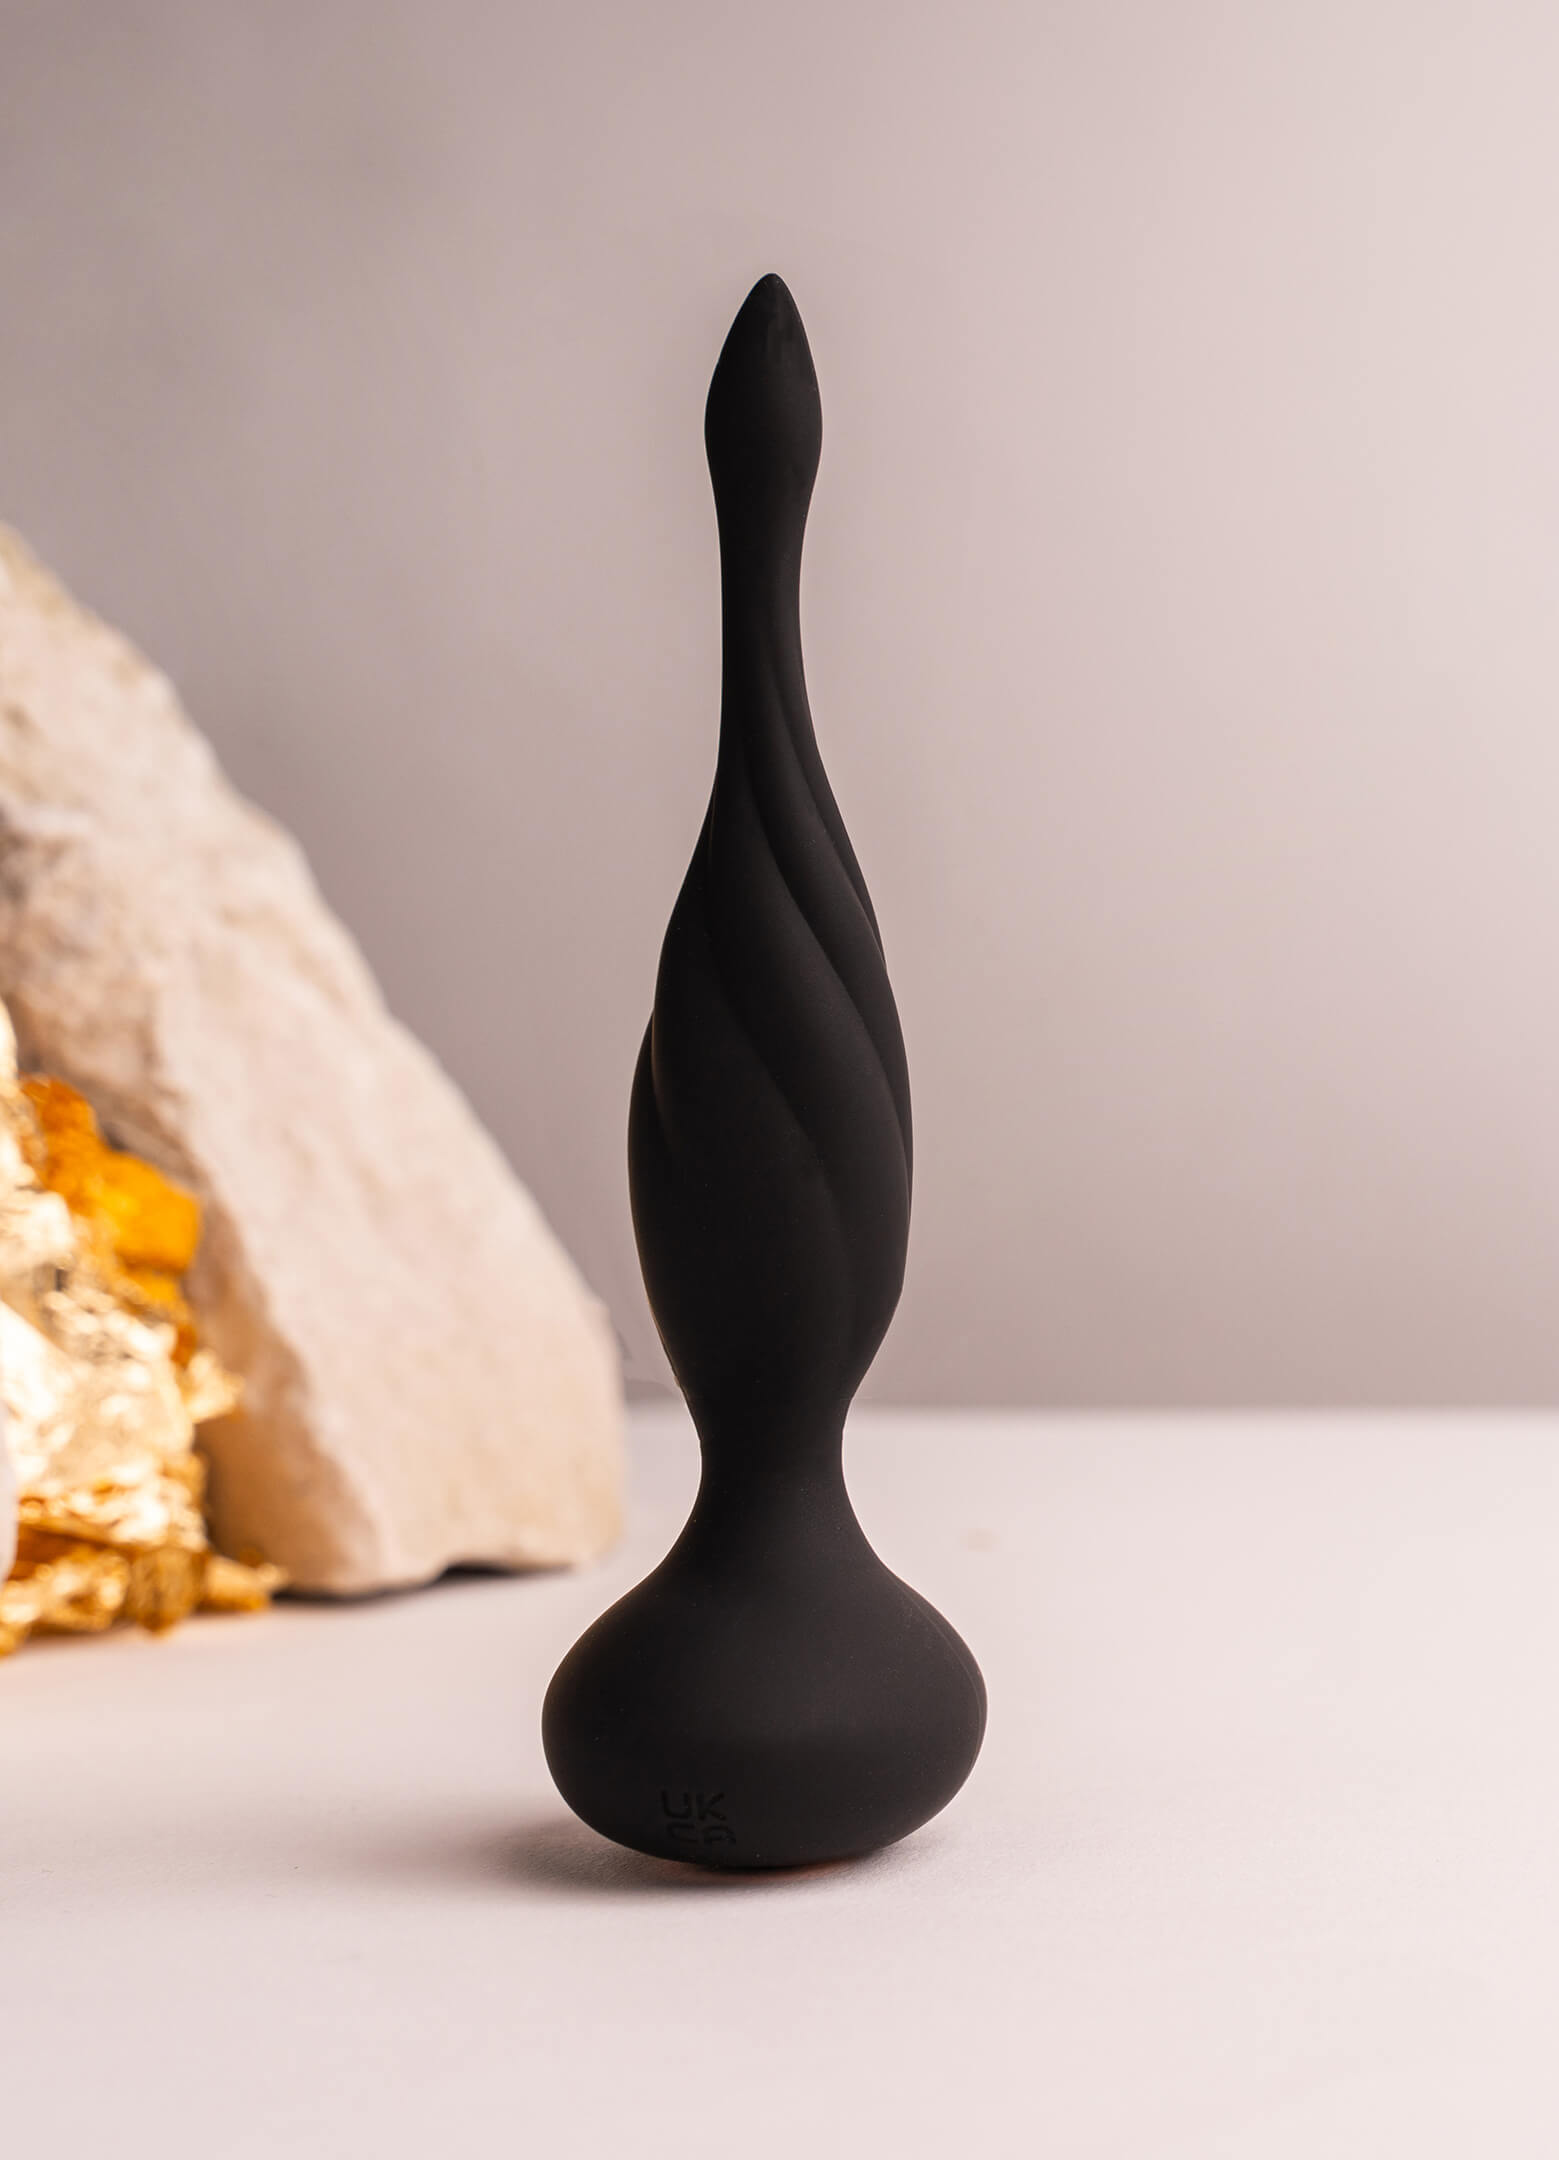 Thin tipped black silicone butt plug with a twisted surface design.